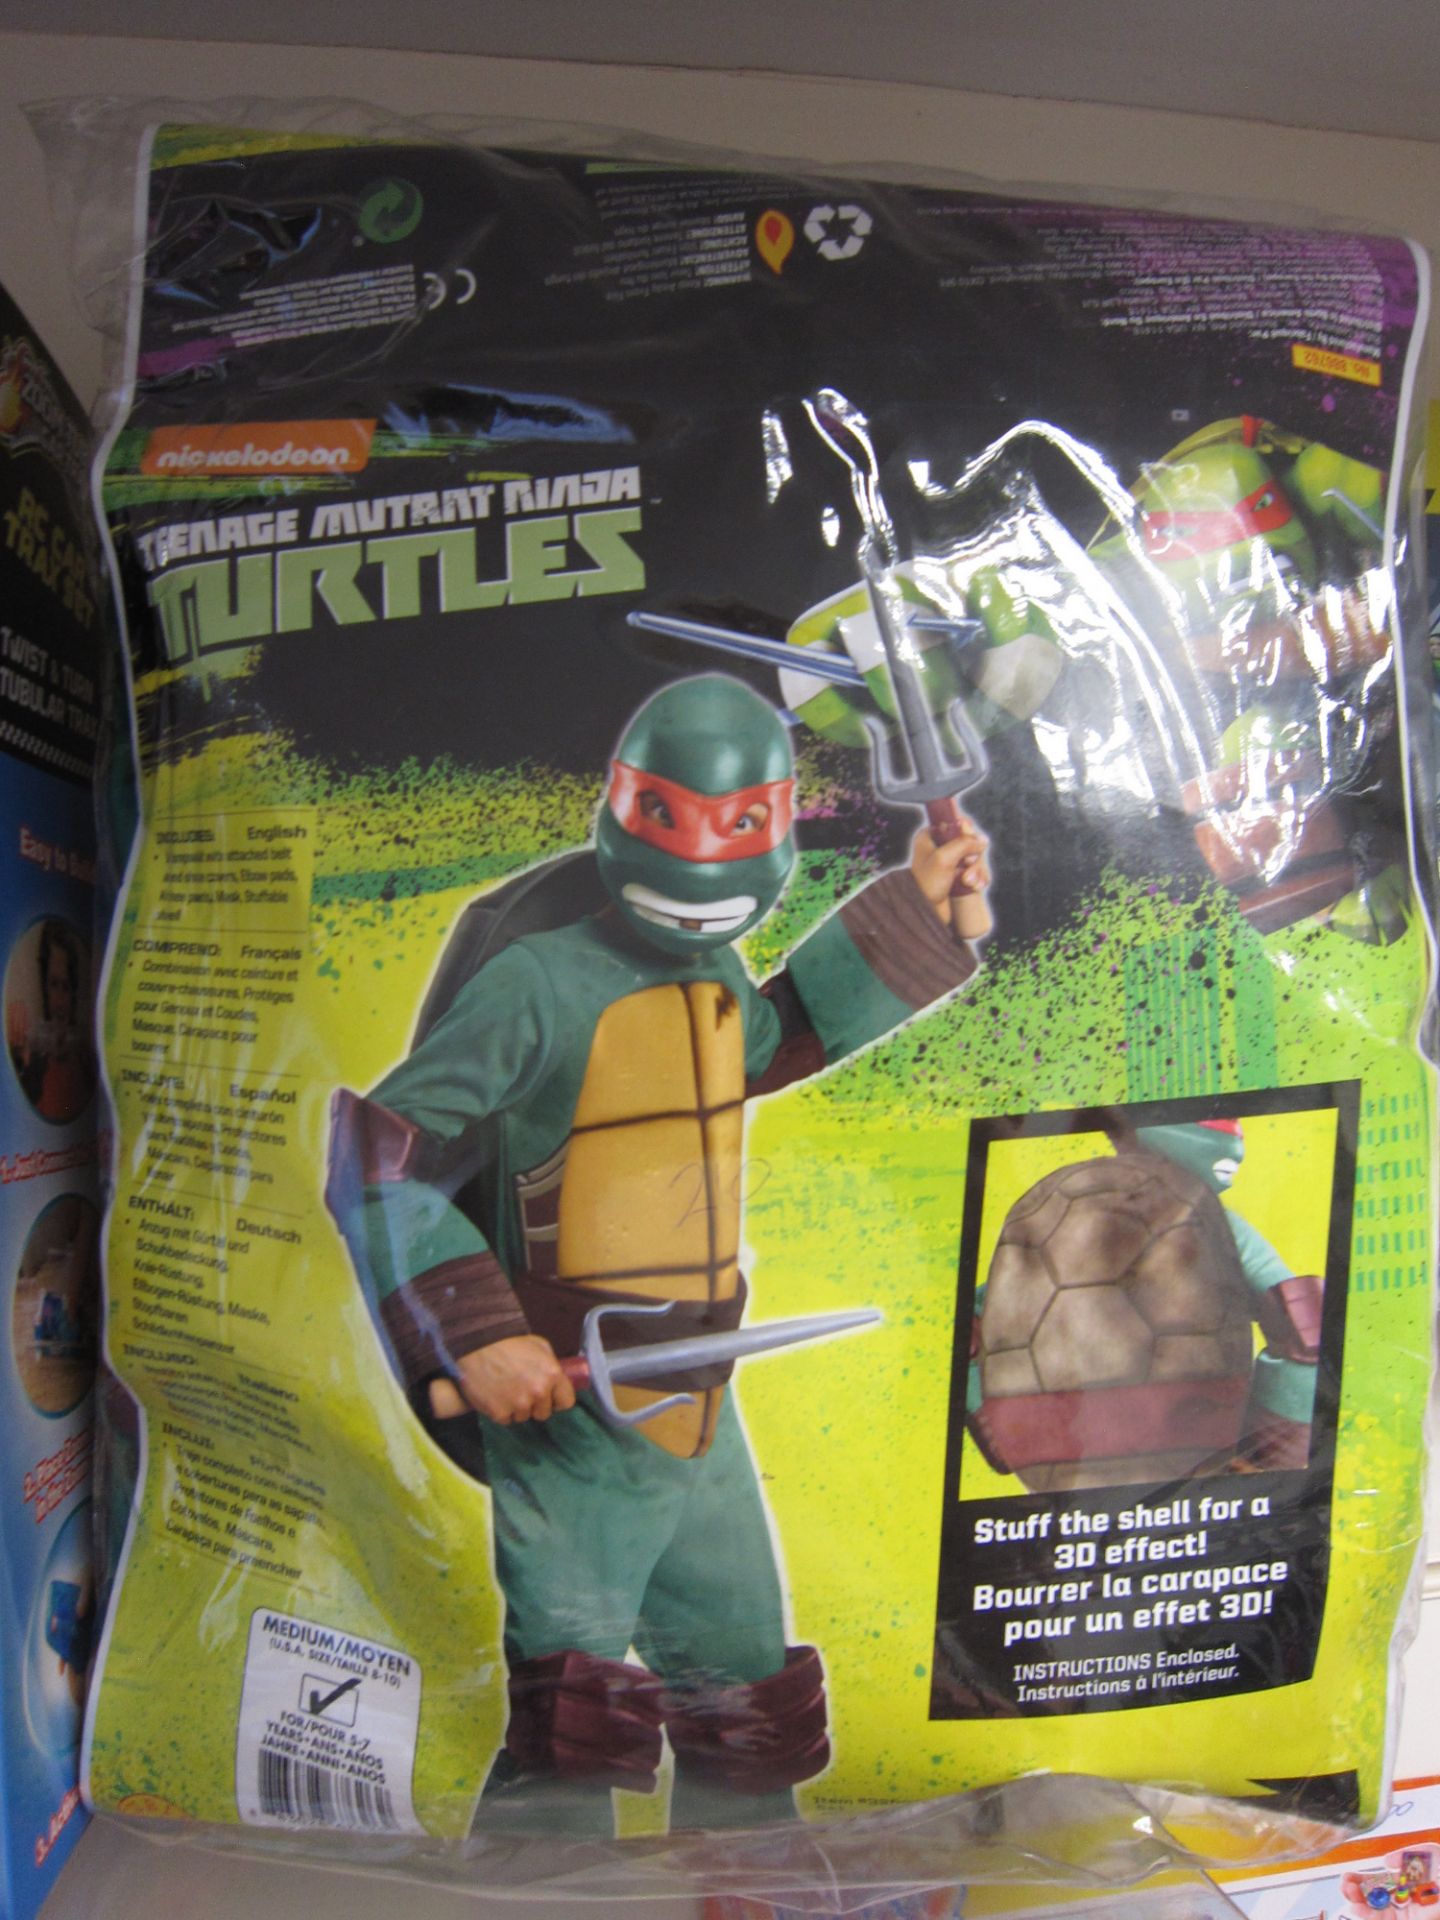 10 Sets Brand New Sealed TMNT Dress Up Outfits With Hard Face Mask and Shell Cape - RRP £29.99